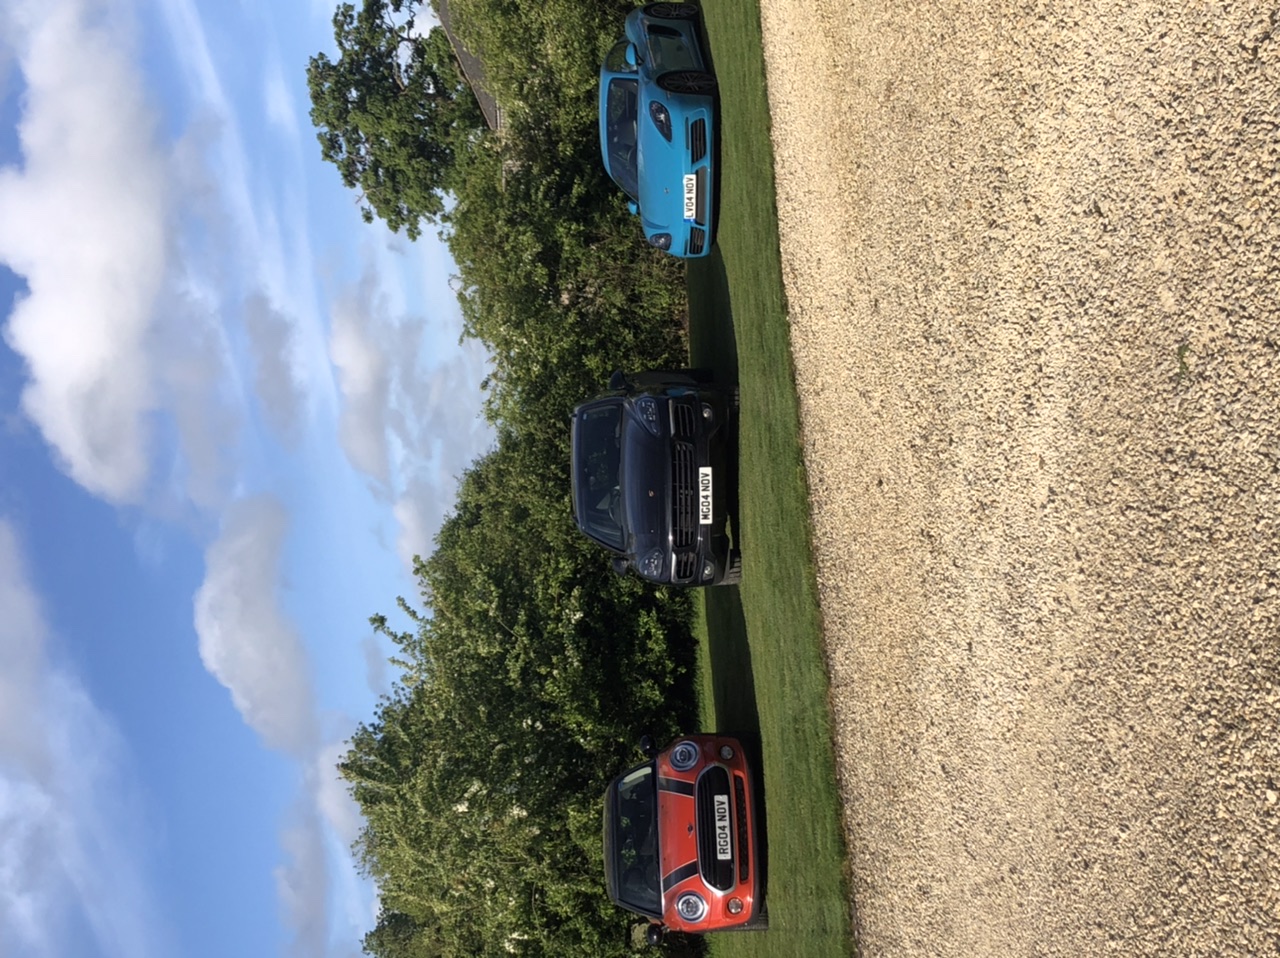 Show us a photo of your fleet. - Page 17 - General Gassing - PistonHeads